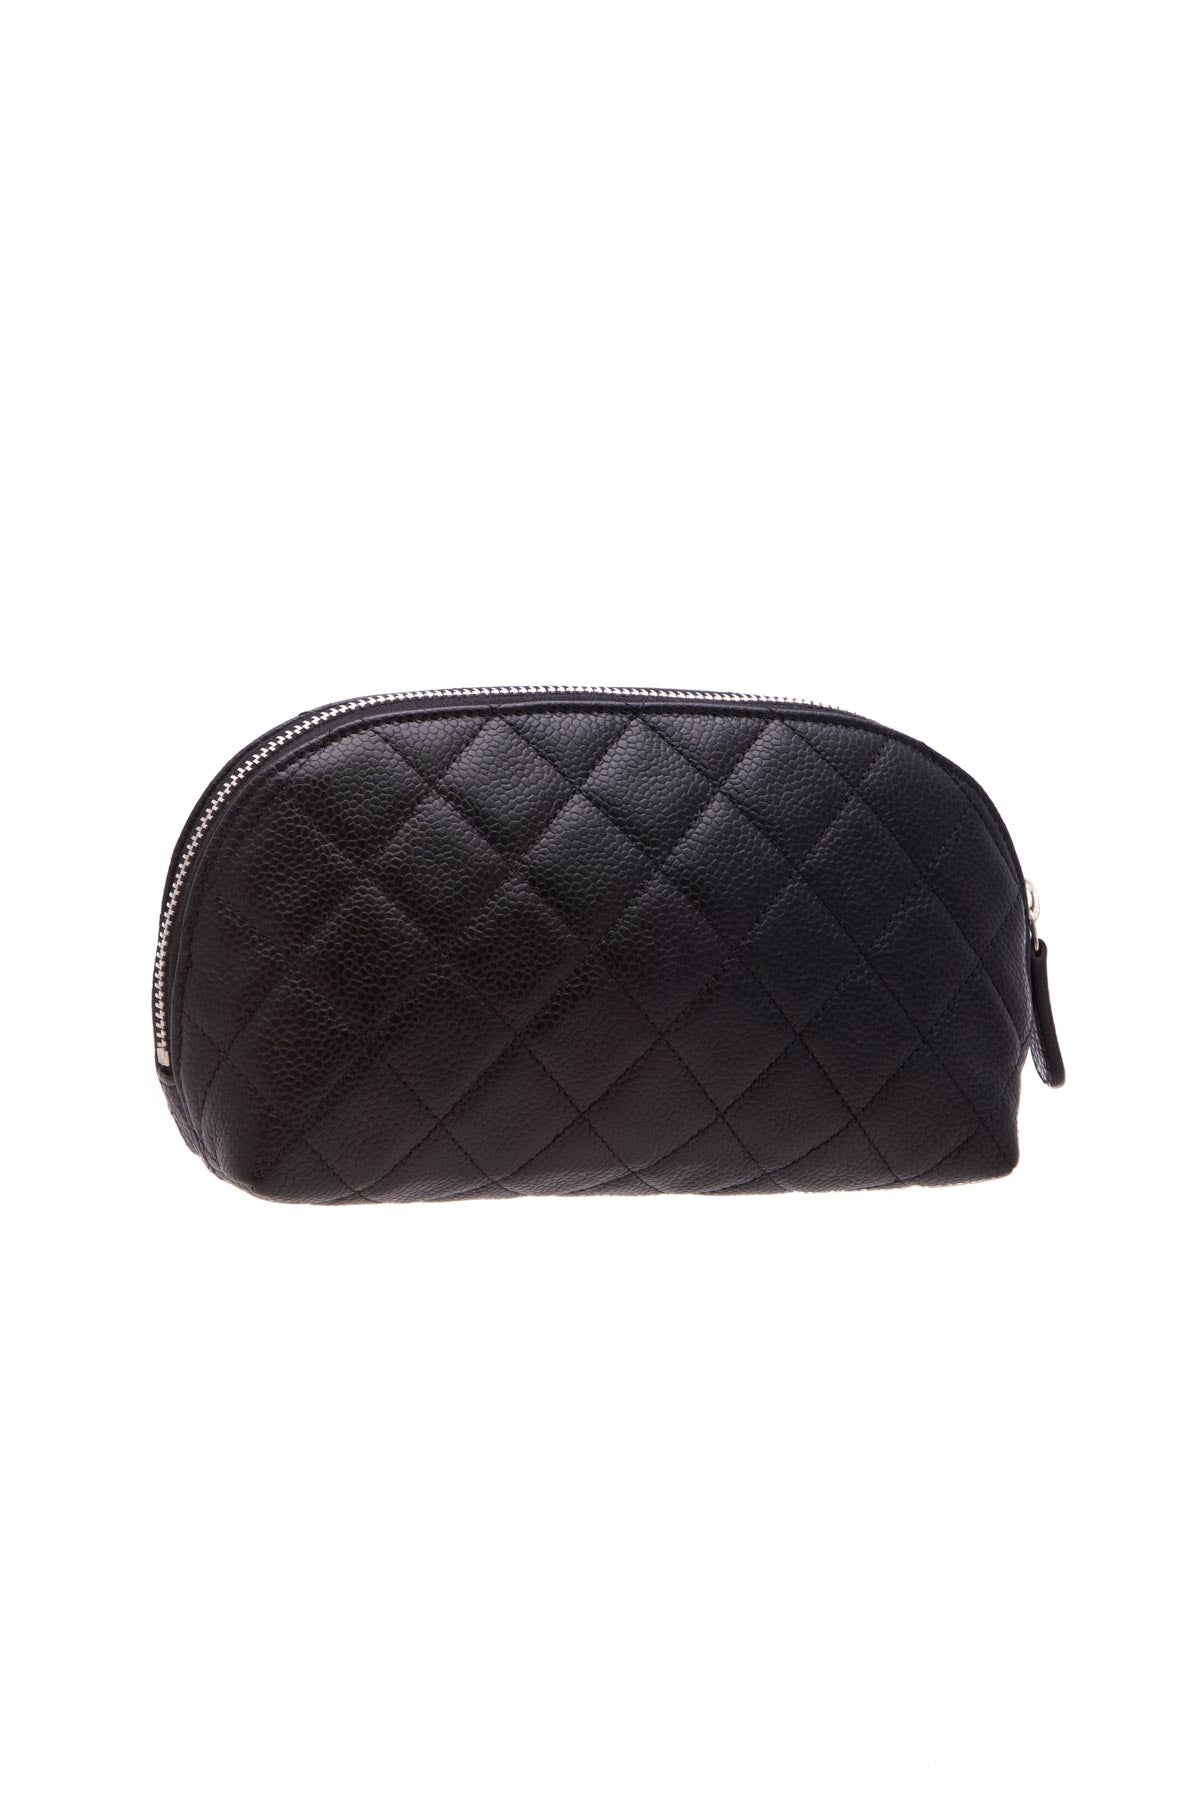 Chanel Cosmetics Pouch